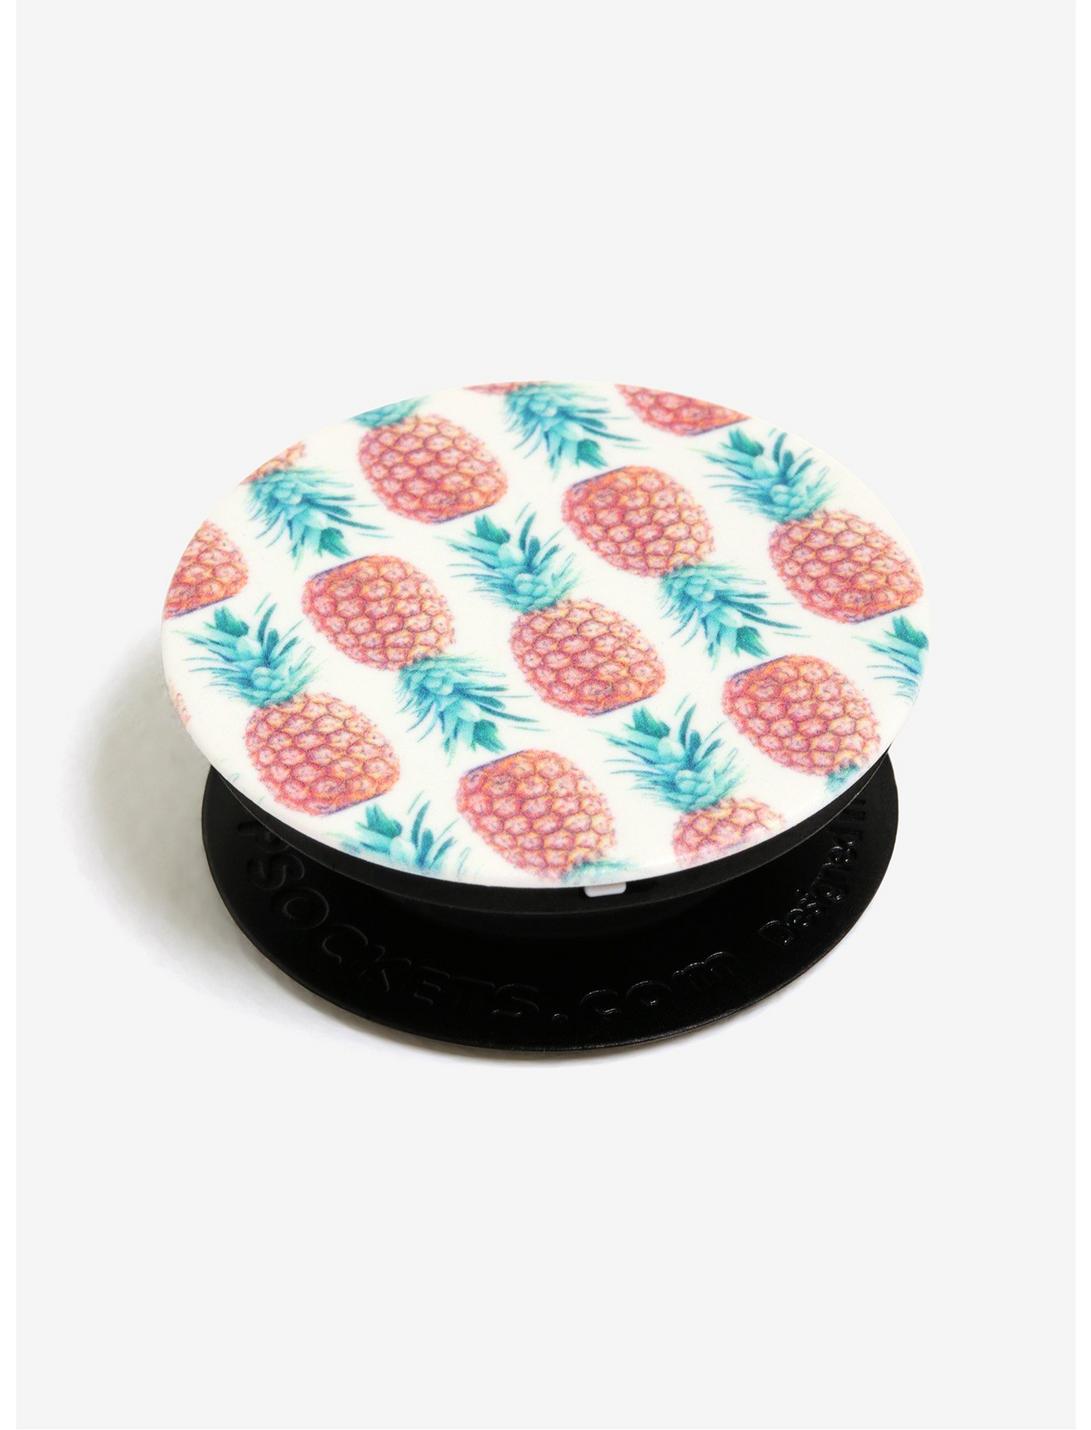 PopSockets Pineapple Phone Grip & Stand, , hi-res